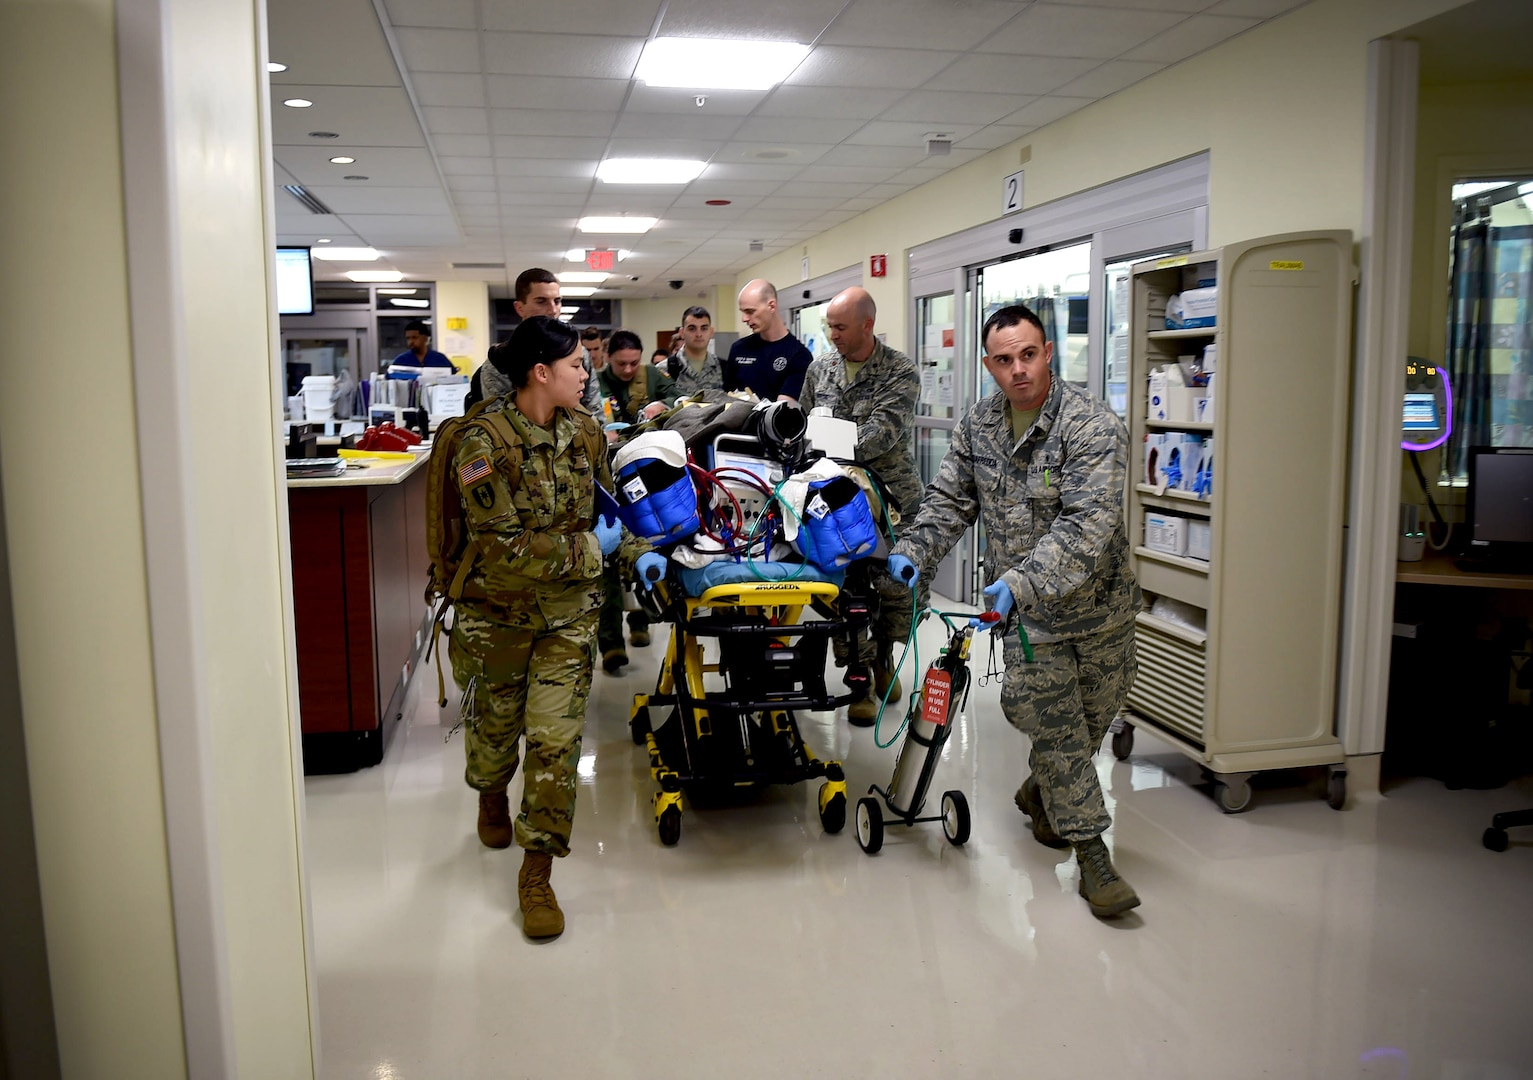 Members of the 59th Medical Wing Acute Lung Rescue Team transport a patient inside the San Antonio Military Medical Center on nearby Joint Base San Antonio-Fort Sam Houston, Texas, Oct. 15, 2016. The 59th MDW’s Acute Lung Rescue Team is comprised of medics with extensive training of aeromedical evacuation techniques. The team’s mission is to ensure patients are safely transported to a higher echelon of medical care. (U.S. Air Force photo/Staff Sgt. Jerilyn Quintanilla)